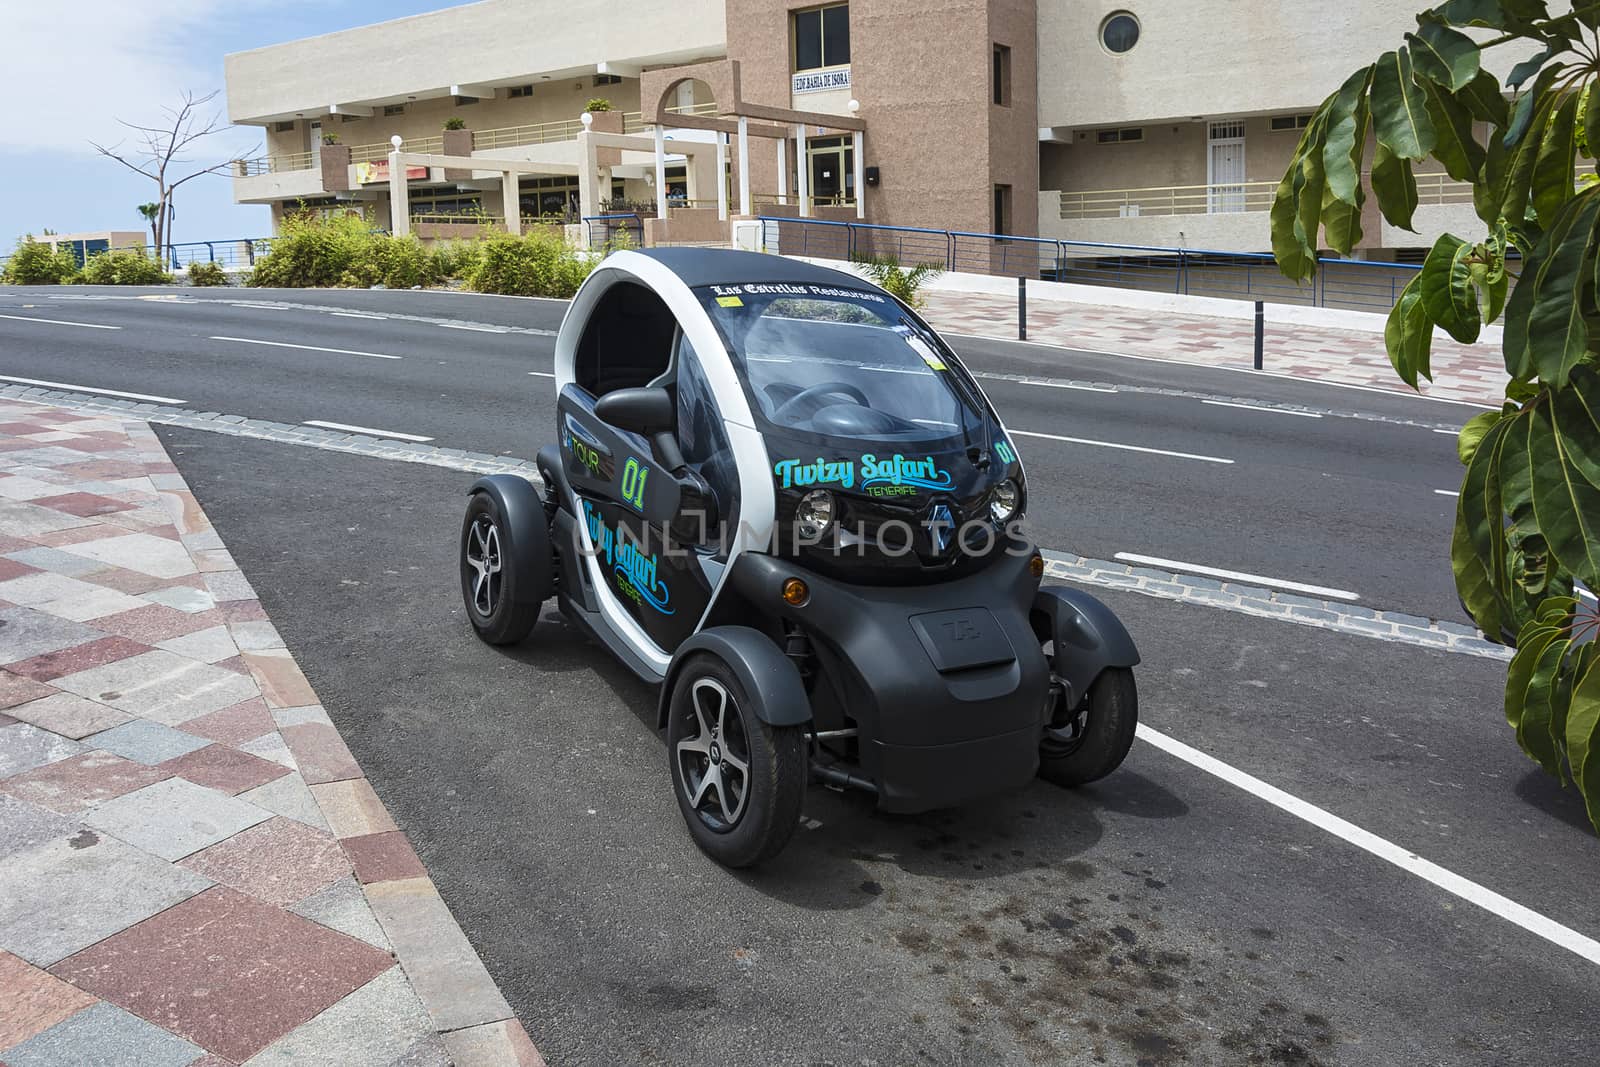 Renault Twizy car is parked in a city street (Tenerife, Spain) by Grommik